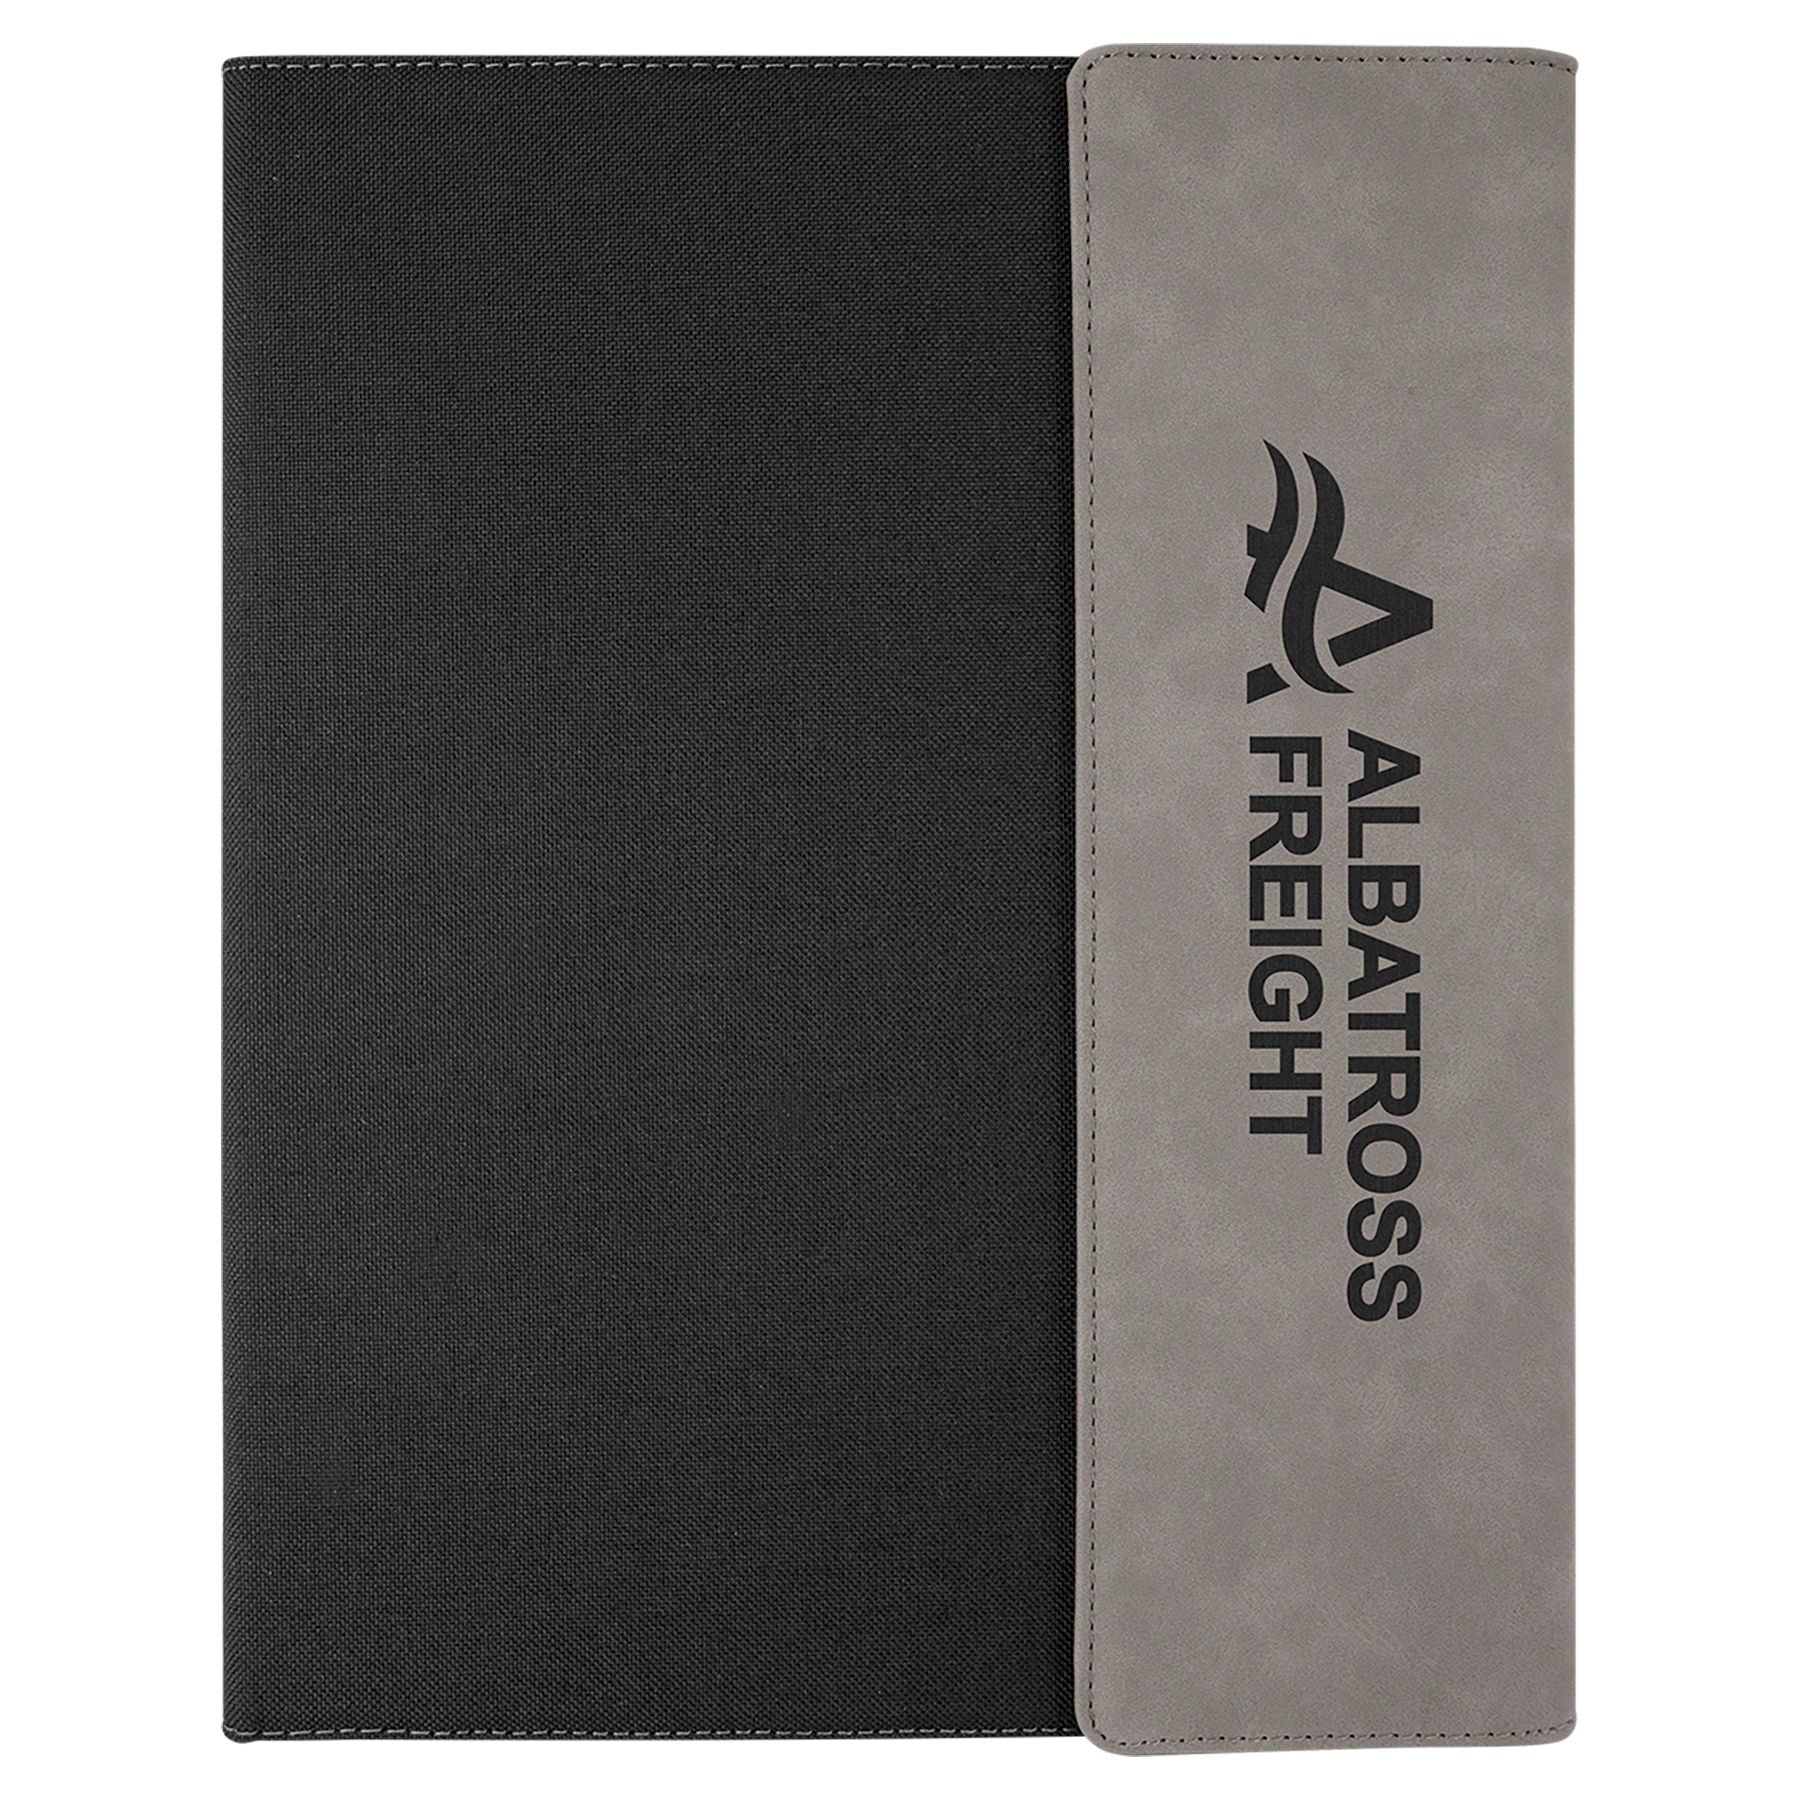 9 1/2" x 12" Laserable Leatherette / Canvas Portfolio with Notepad - Beacon Laser Creations LLC